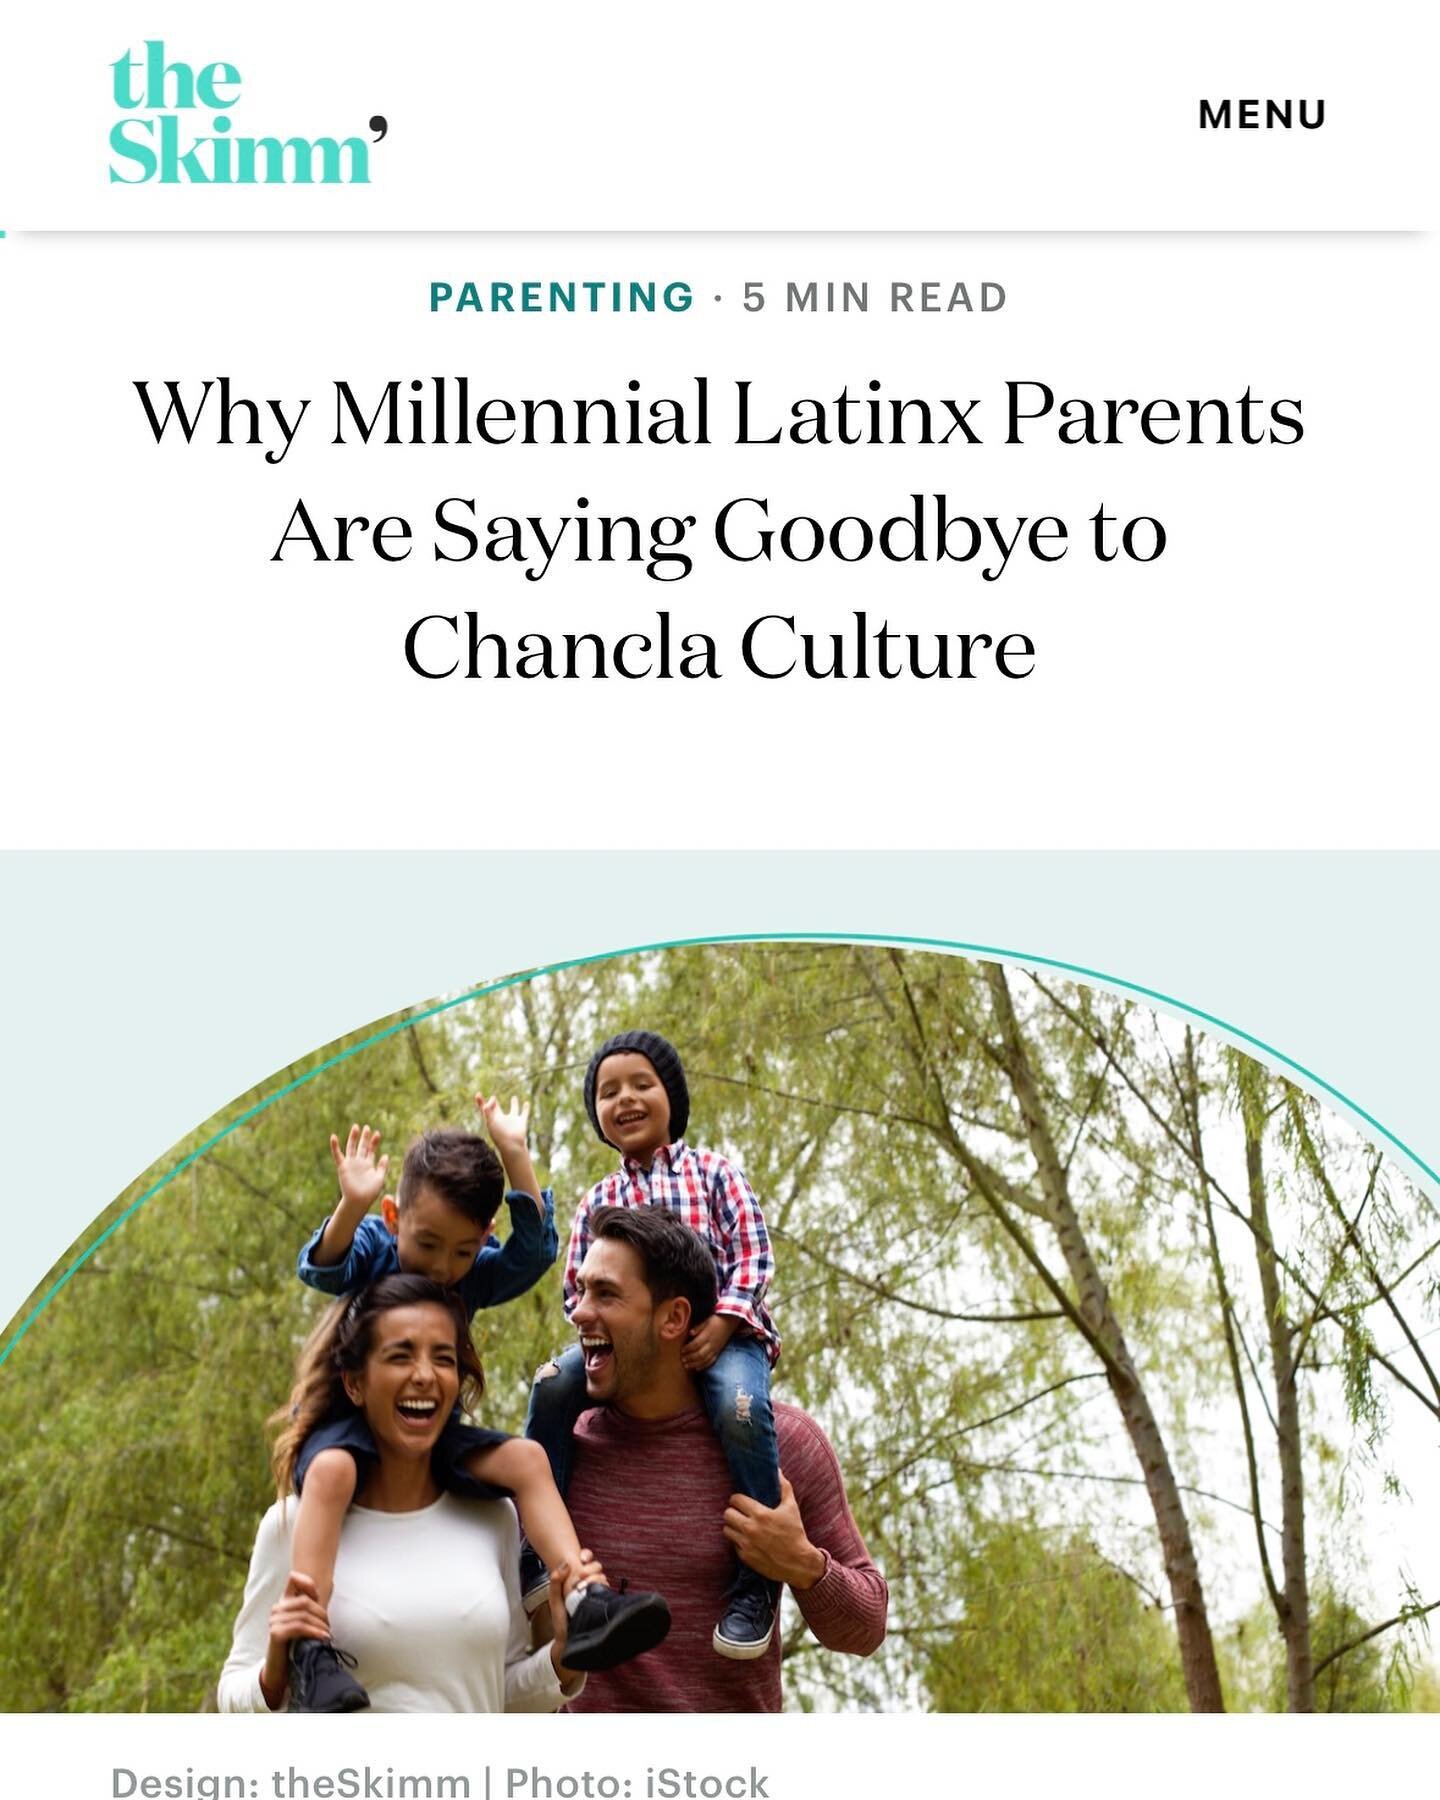 Thank you @theskimm for including me in such an important conversation. Find out more about the future of Latinx parenting and how millennial parents are healing the next generations @theskimm 
Written by: @msirinagonzalez @claudiarupcich 
@karellrox